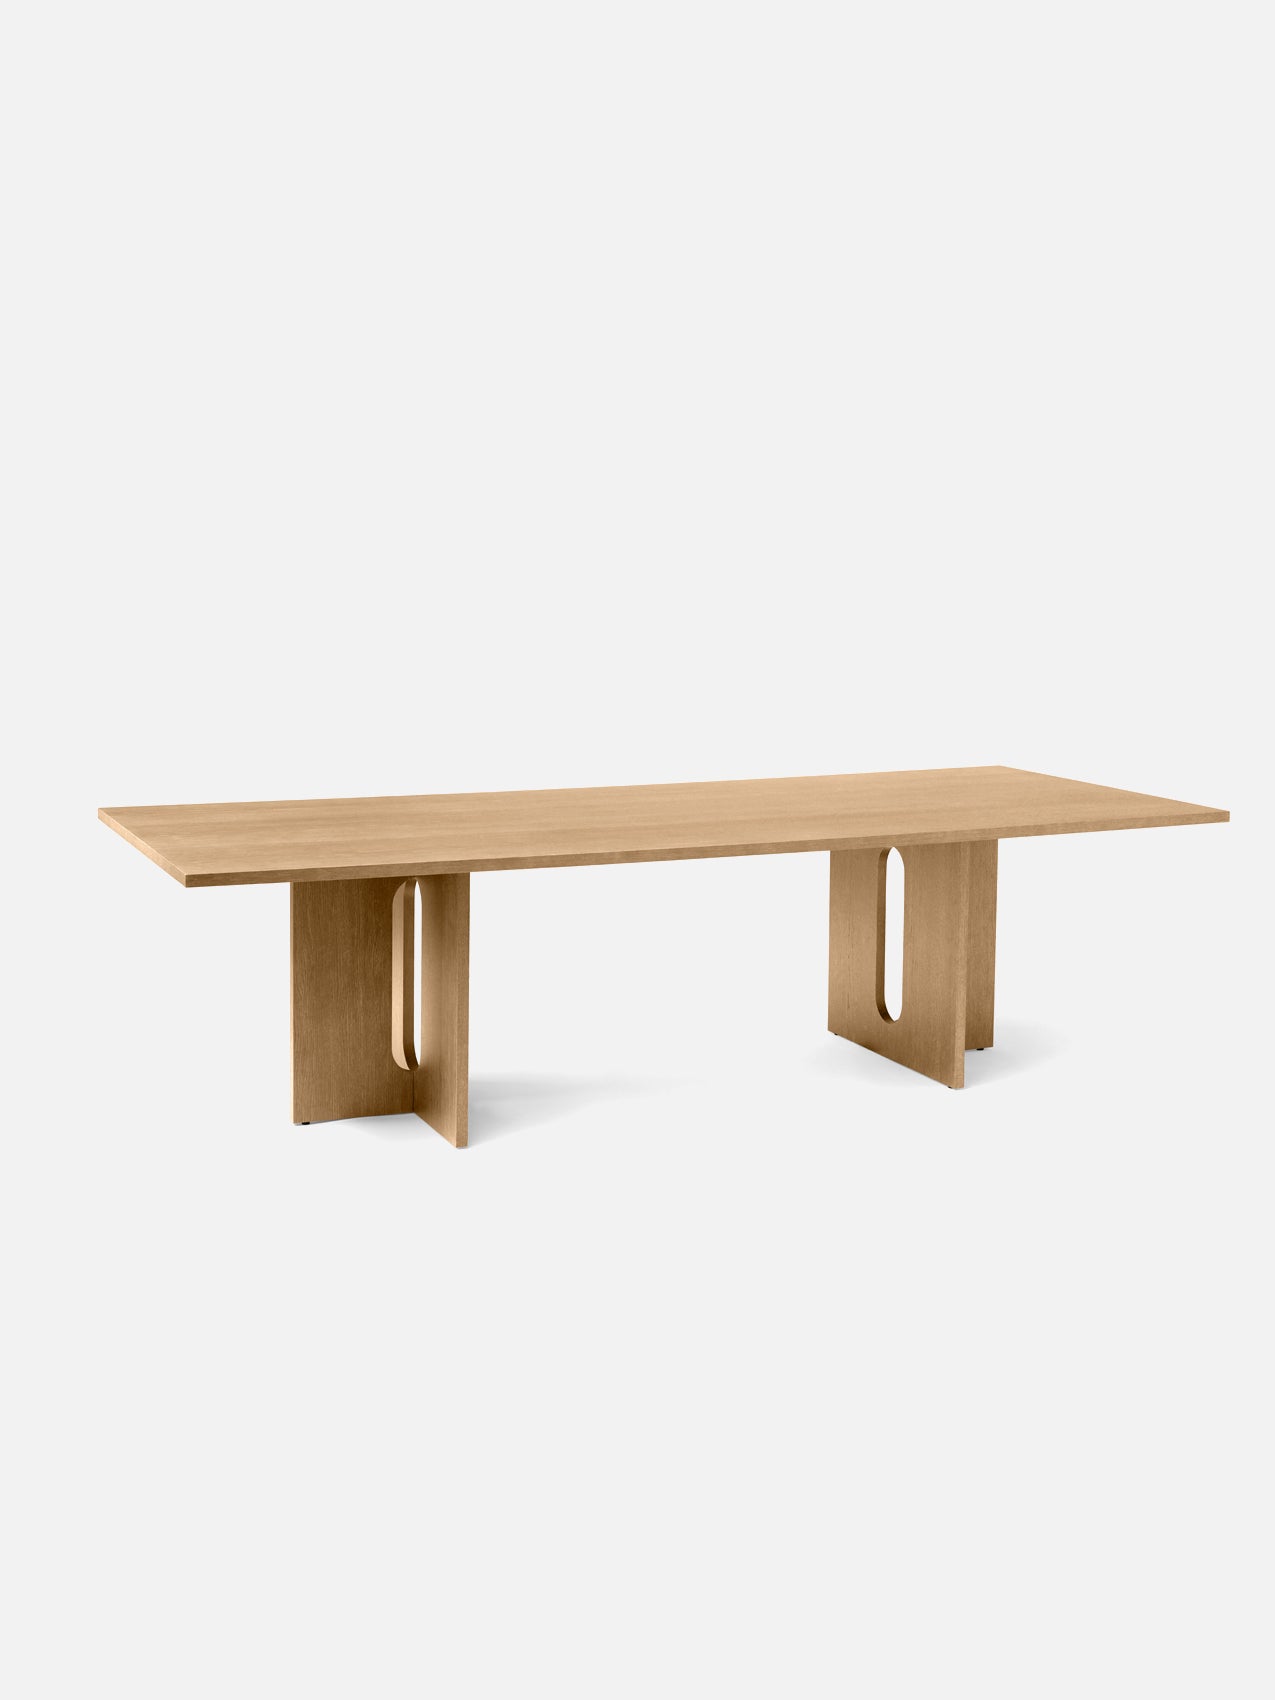 Androgyne Dining Table, Rectangular-Dining Table-Danielle Siggerud-Dining Height (111in)/Natural Oak-Rectangular - Natural Oak-menu-minimalist-modern-danish-design-home-decor